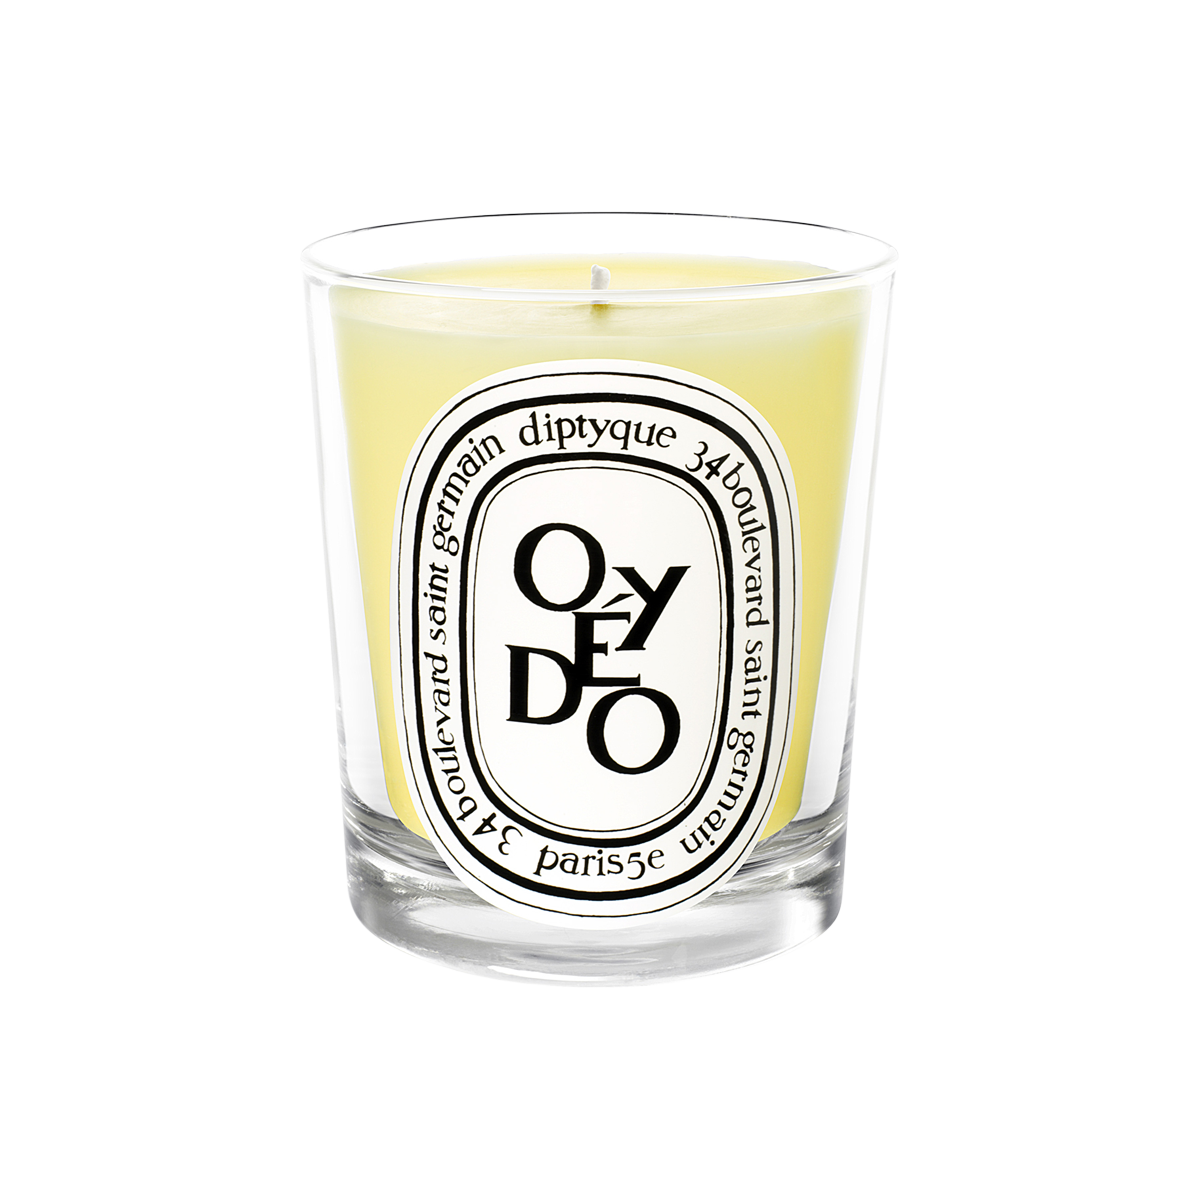 Diptyque - Oyedo Scented Candle